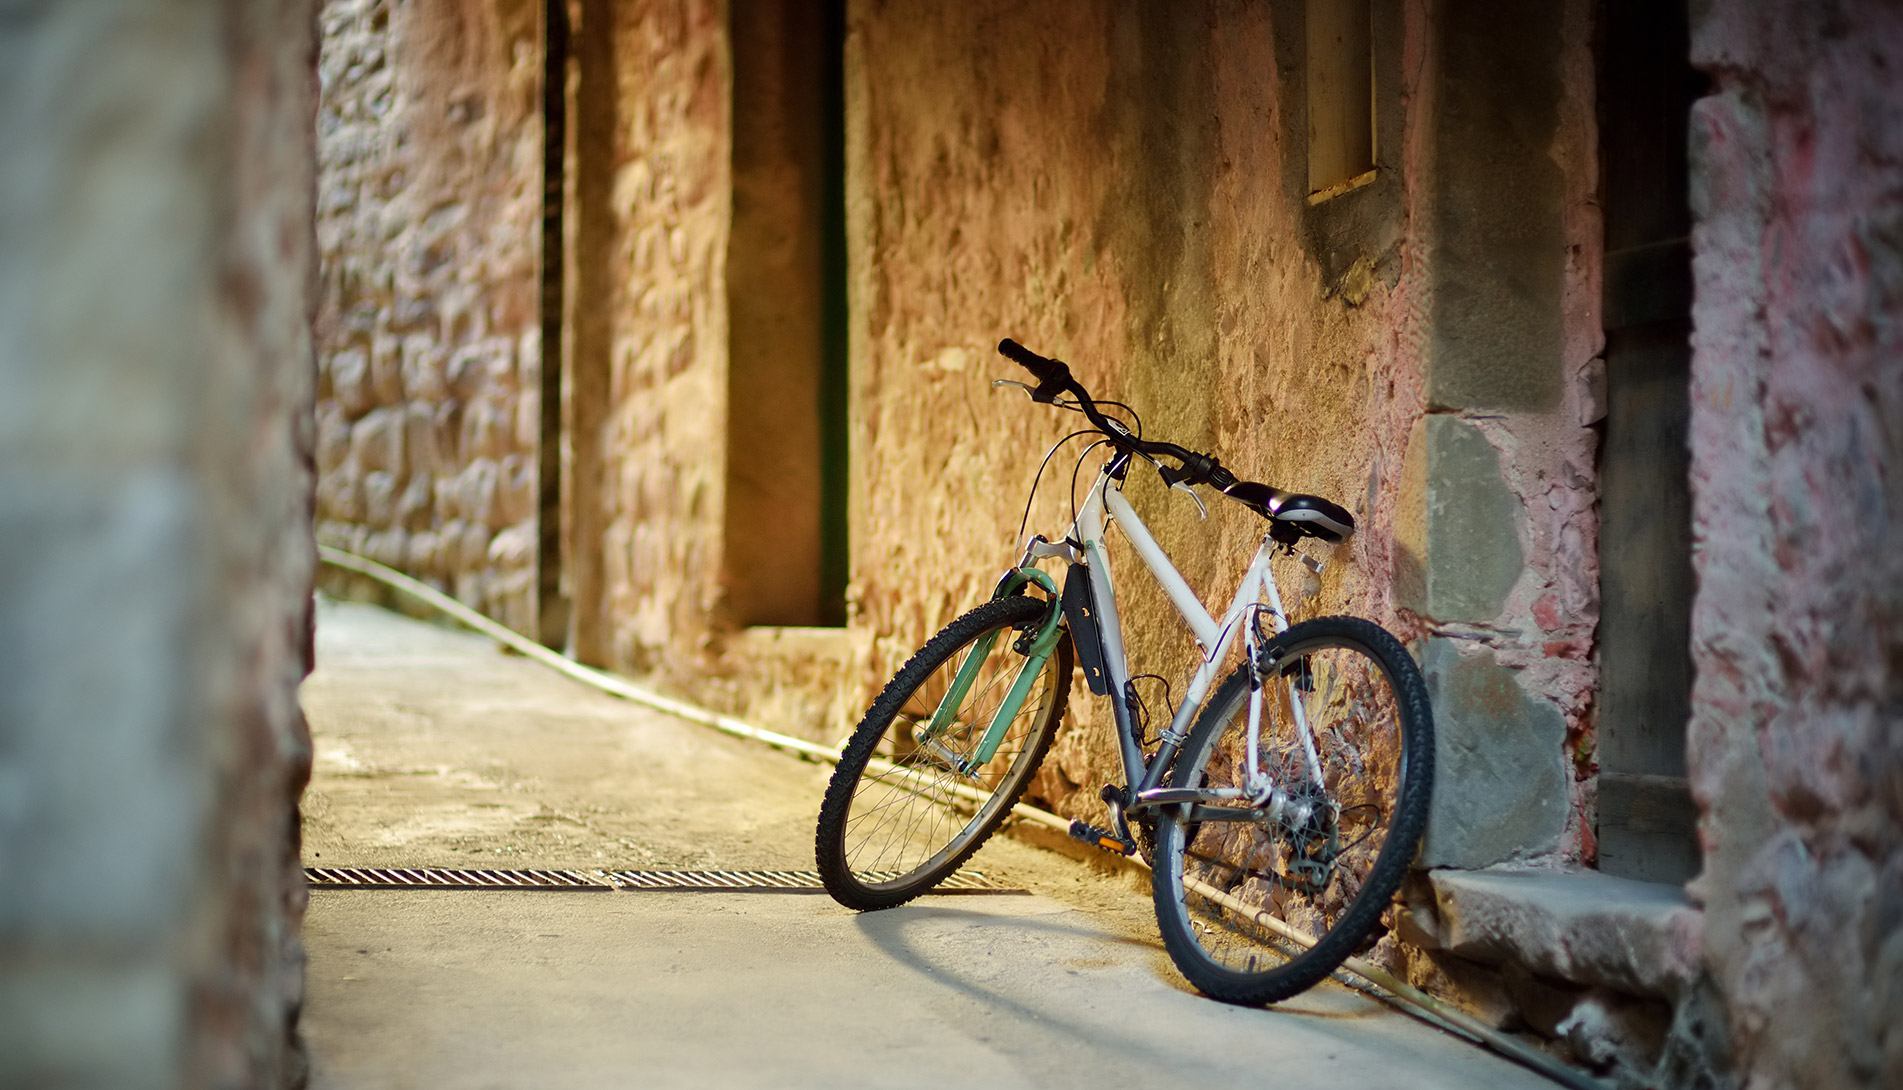 Bicycle leaning on a wall in the village of Camogli